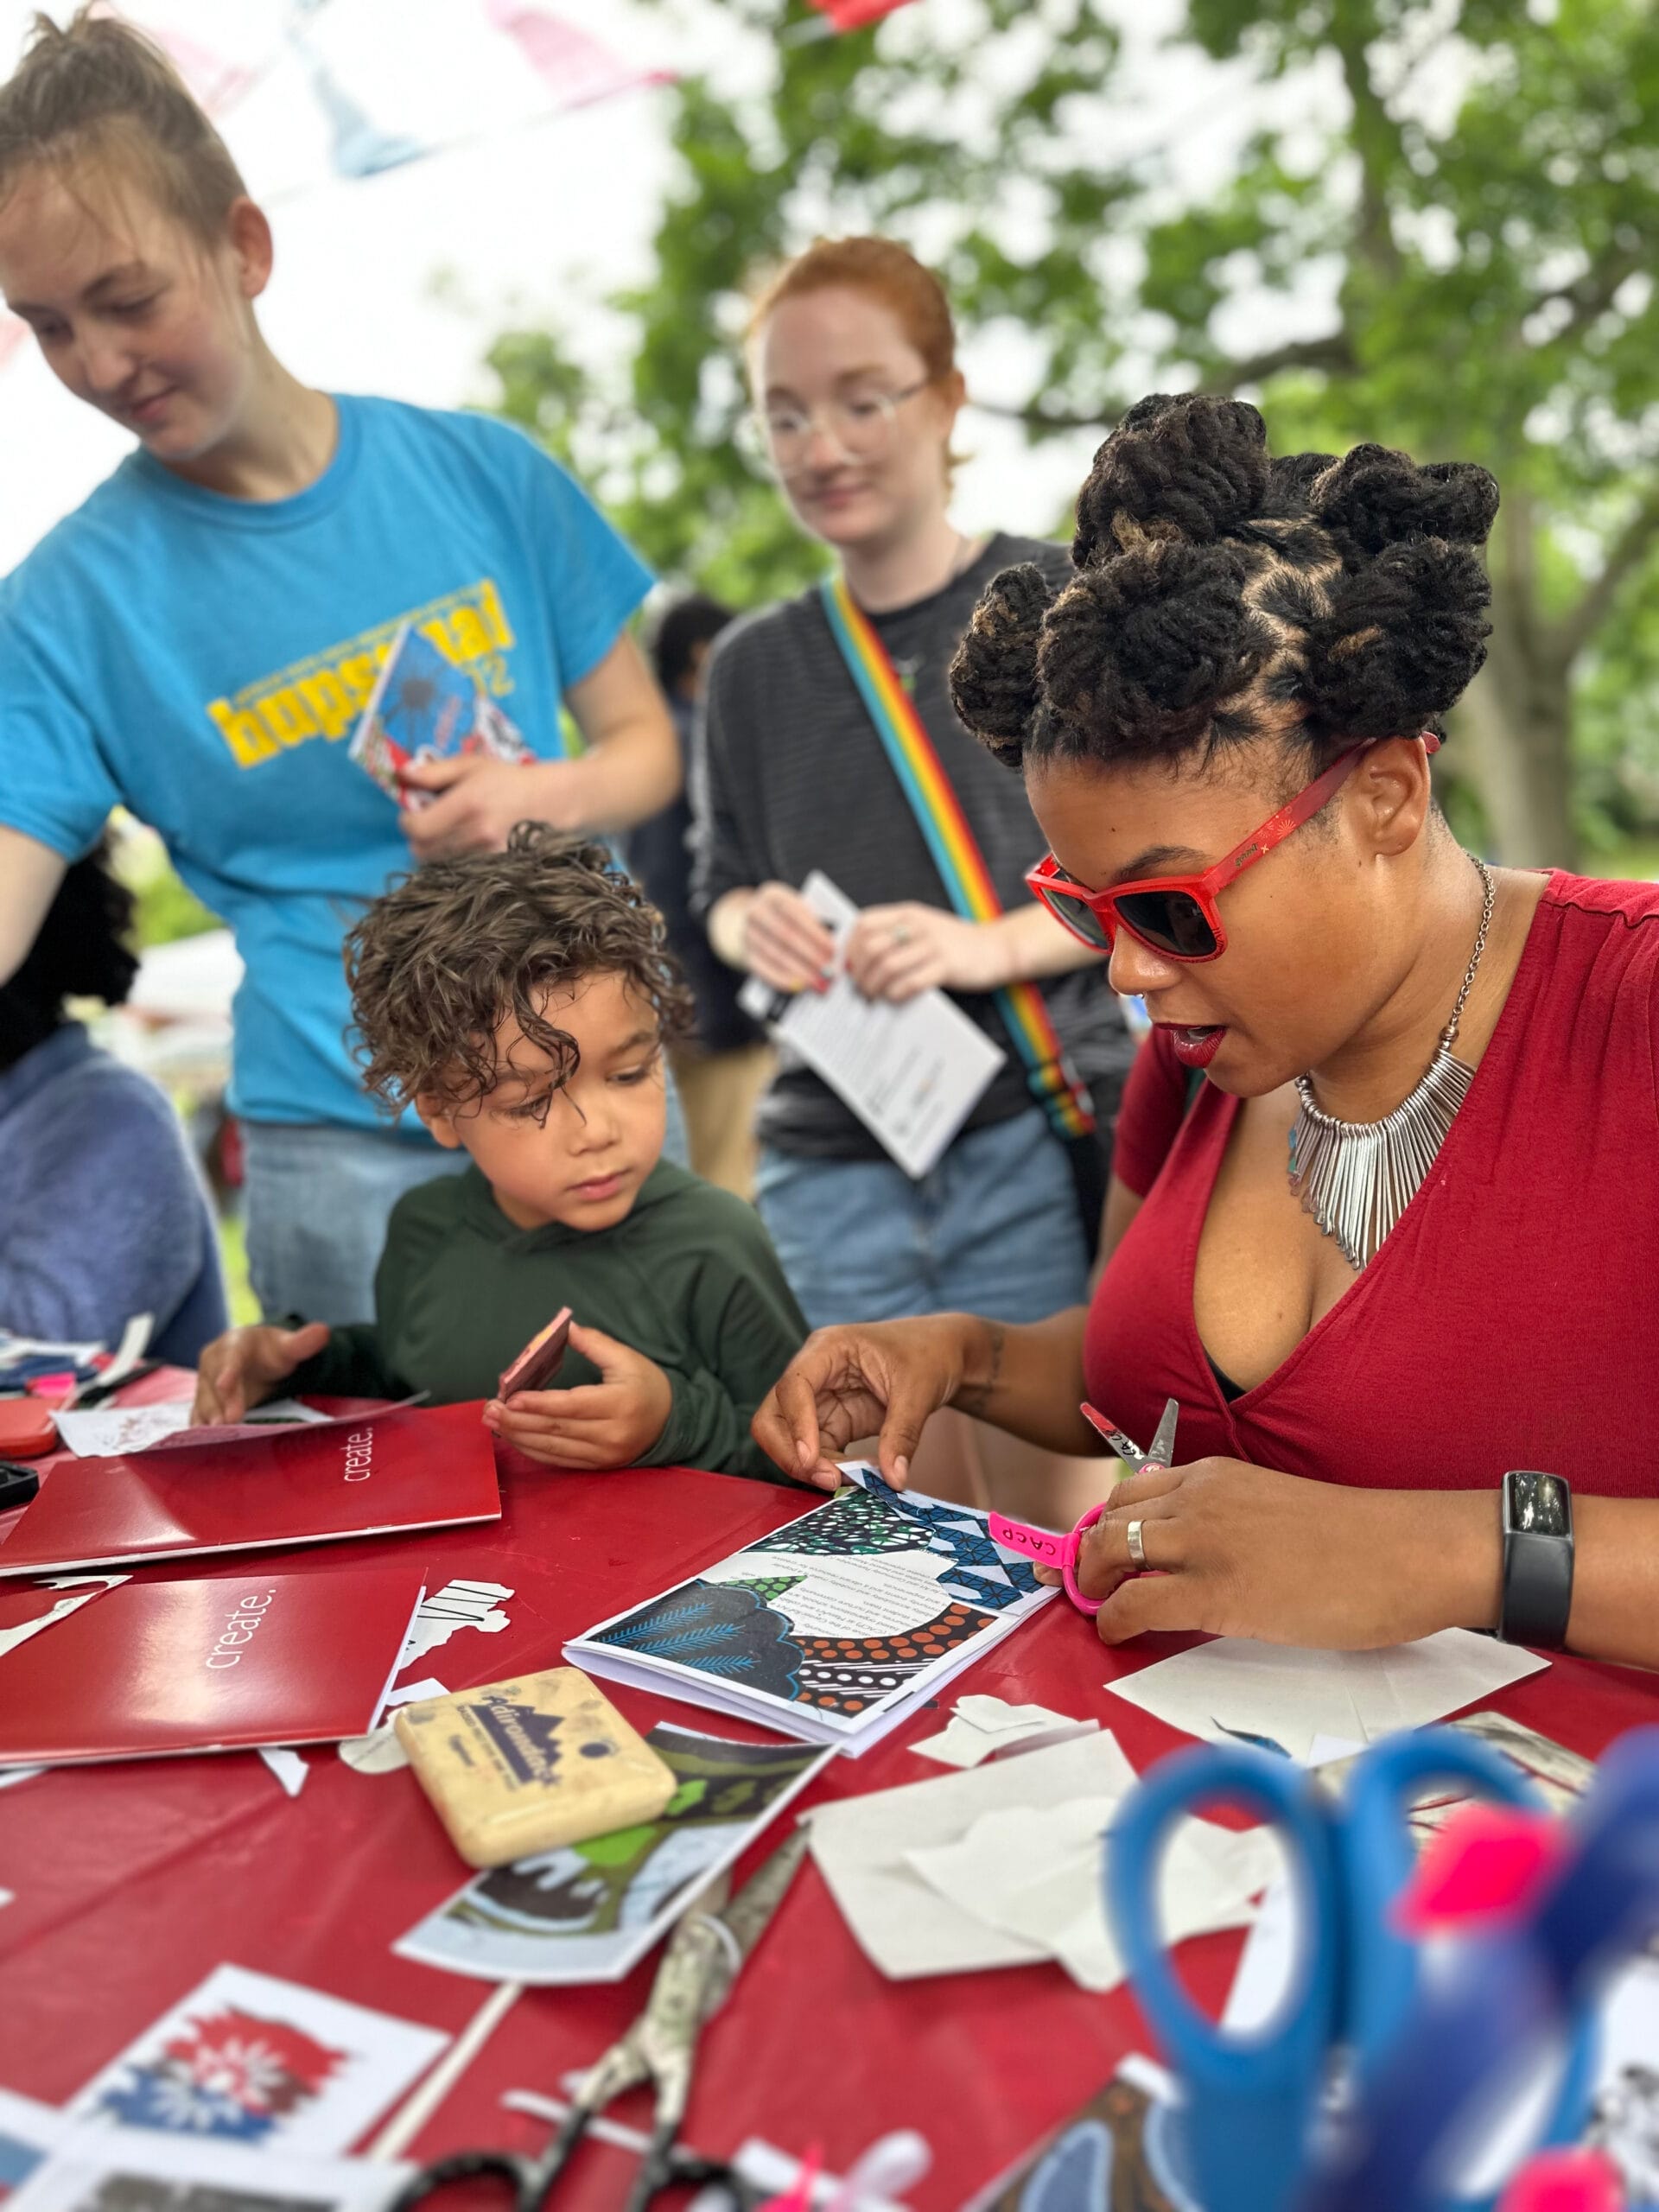 A woman with sunglasses sits at an outdoor table doing a craft with a child.